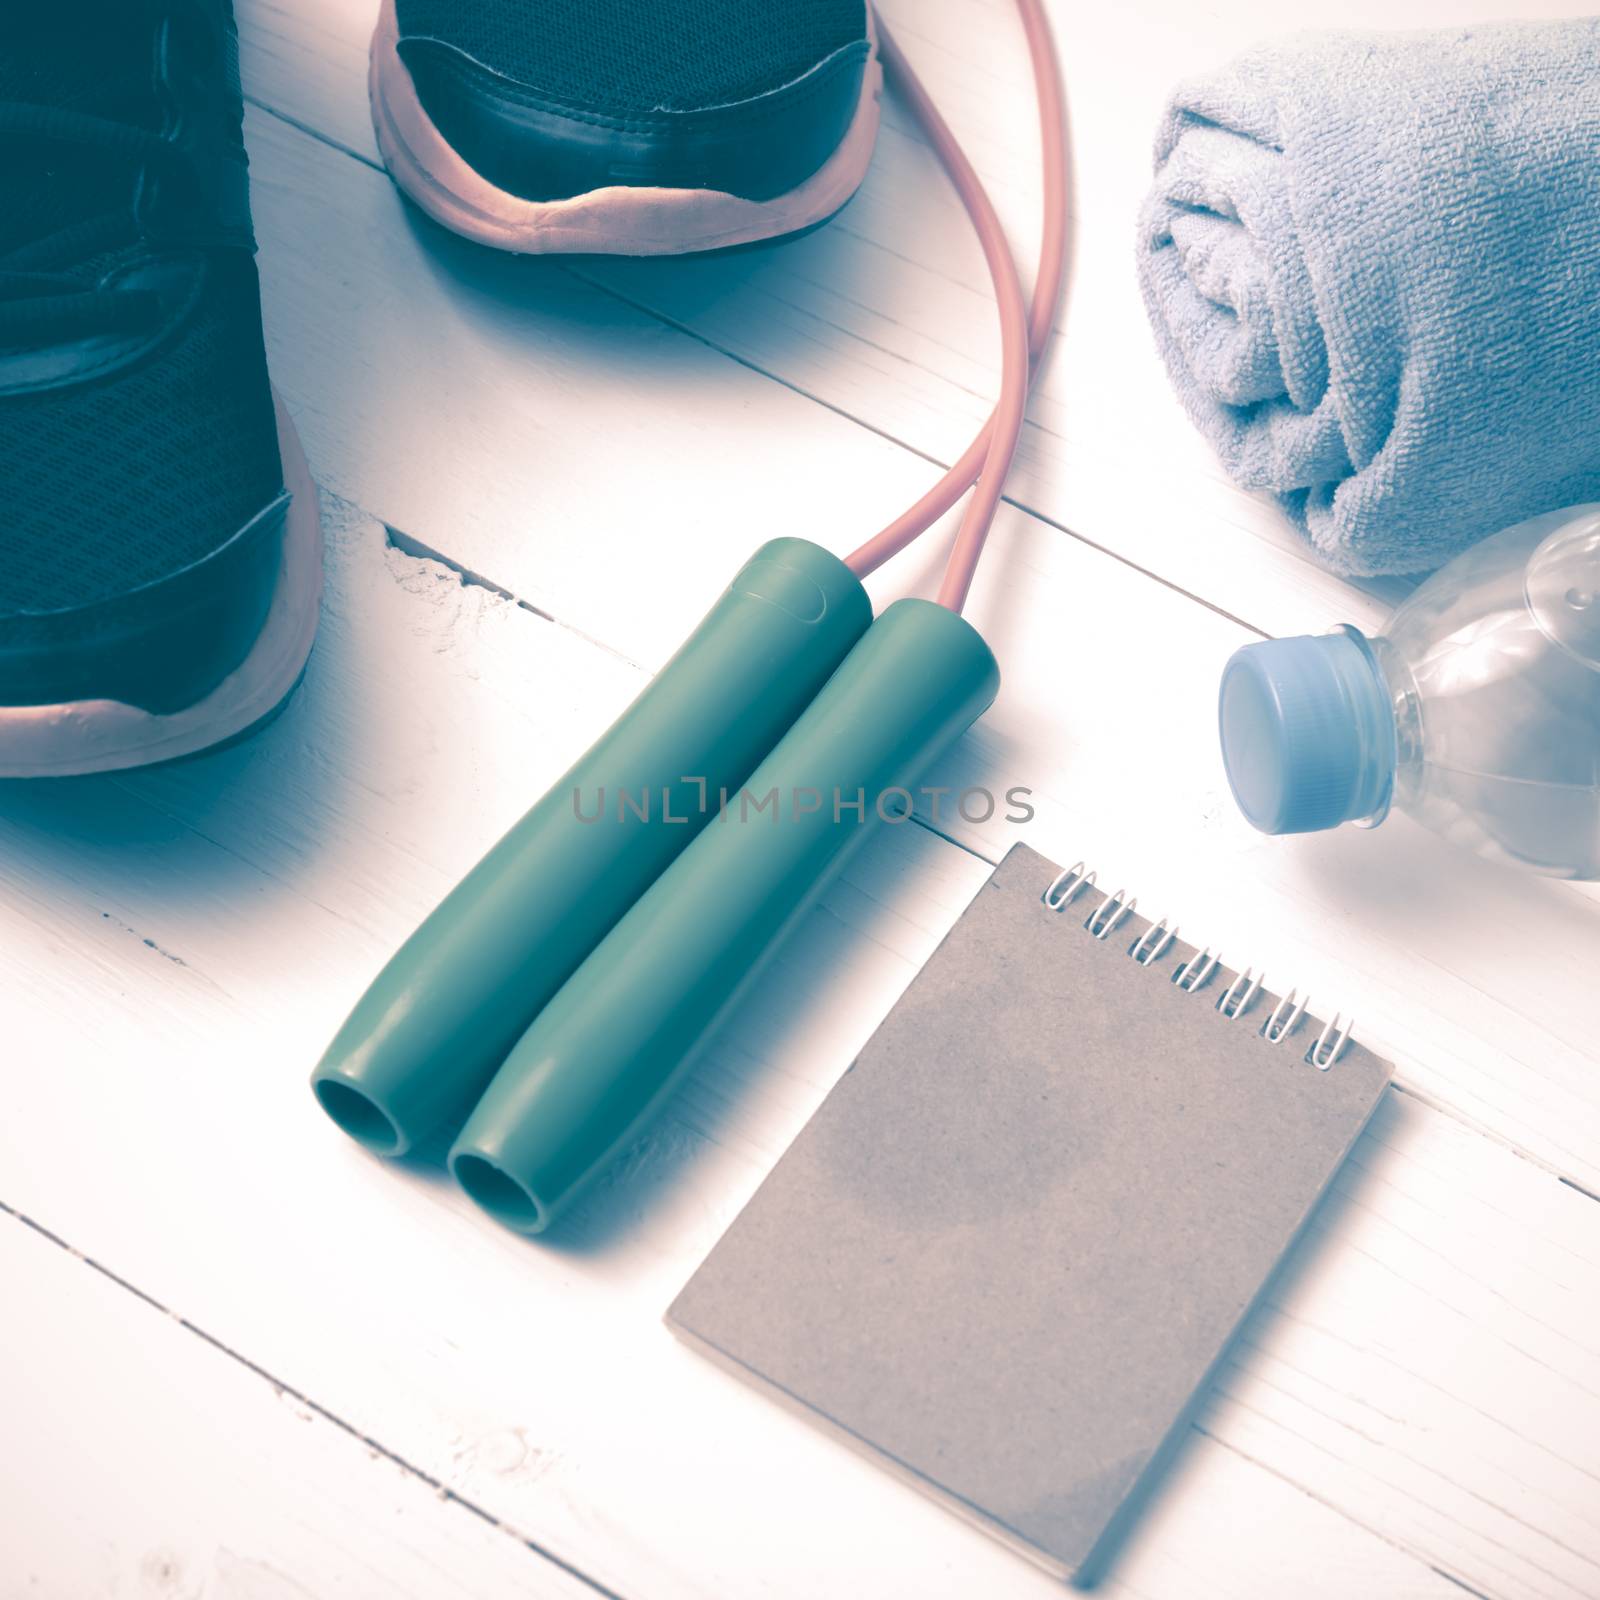 fitness equipment : running shoes,towel,jumping rope,water bottle and notepad on white wood table vintage style